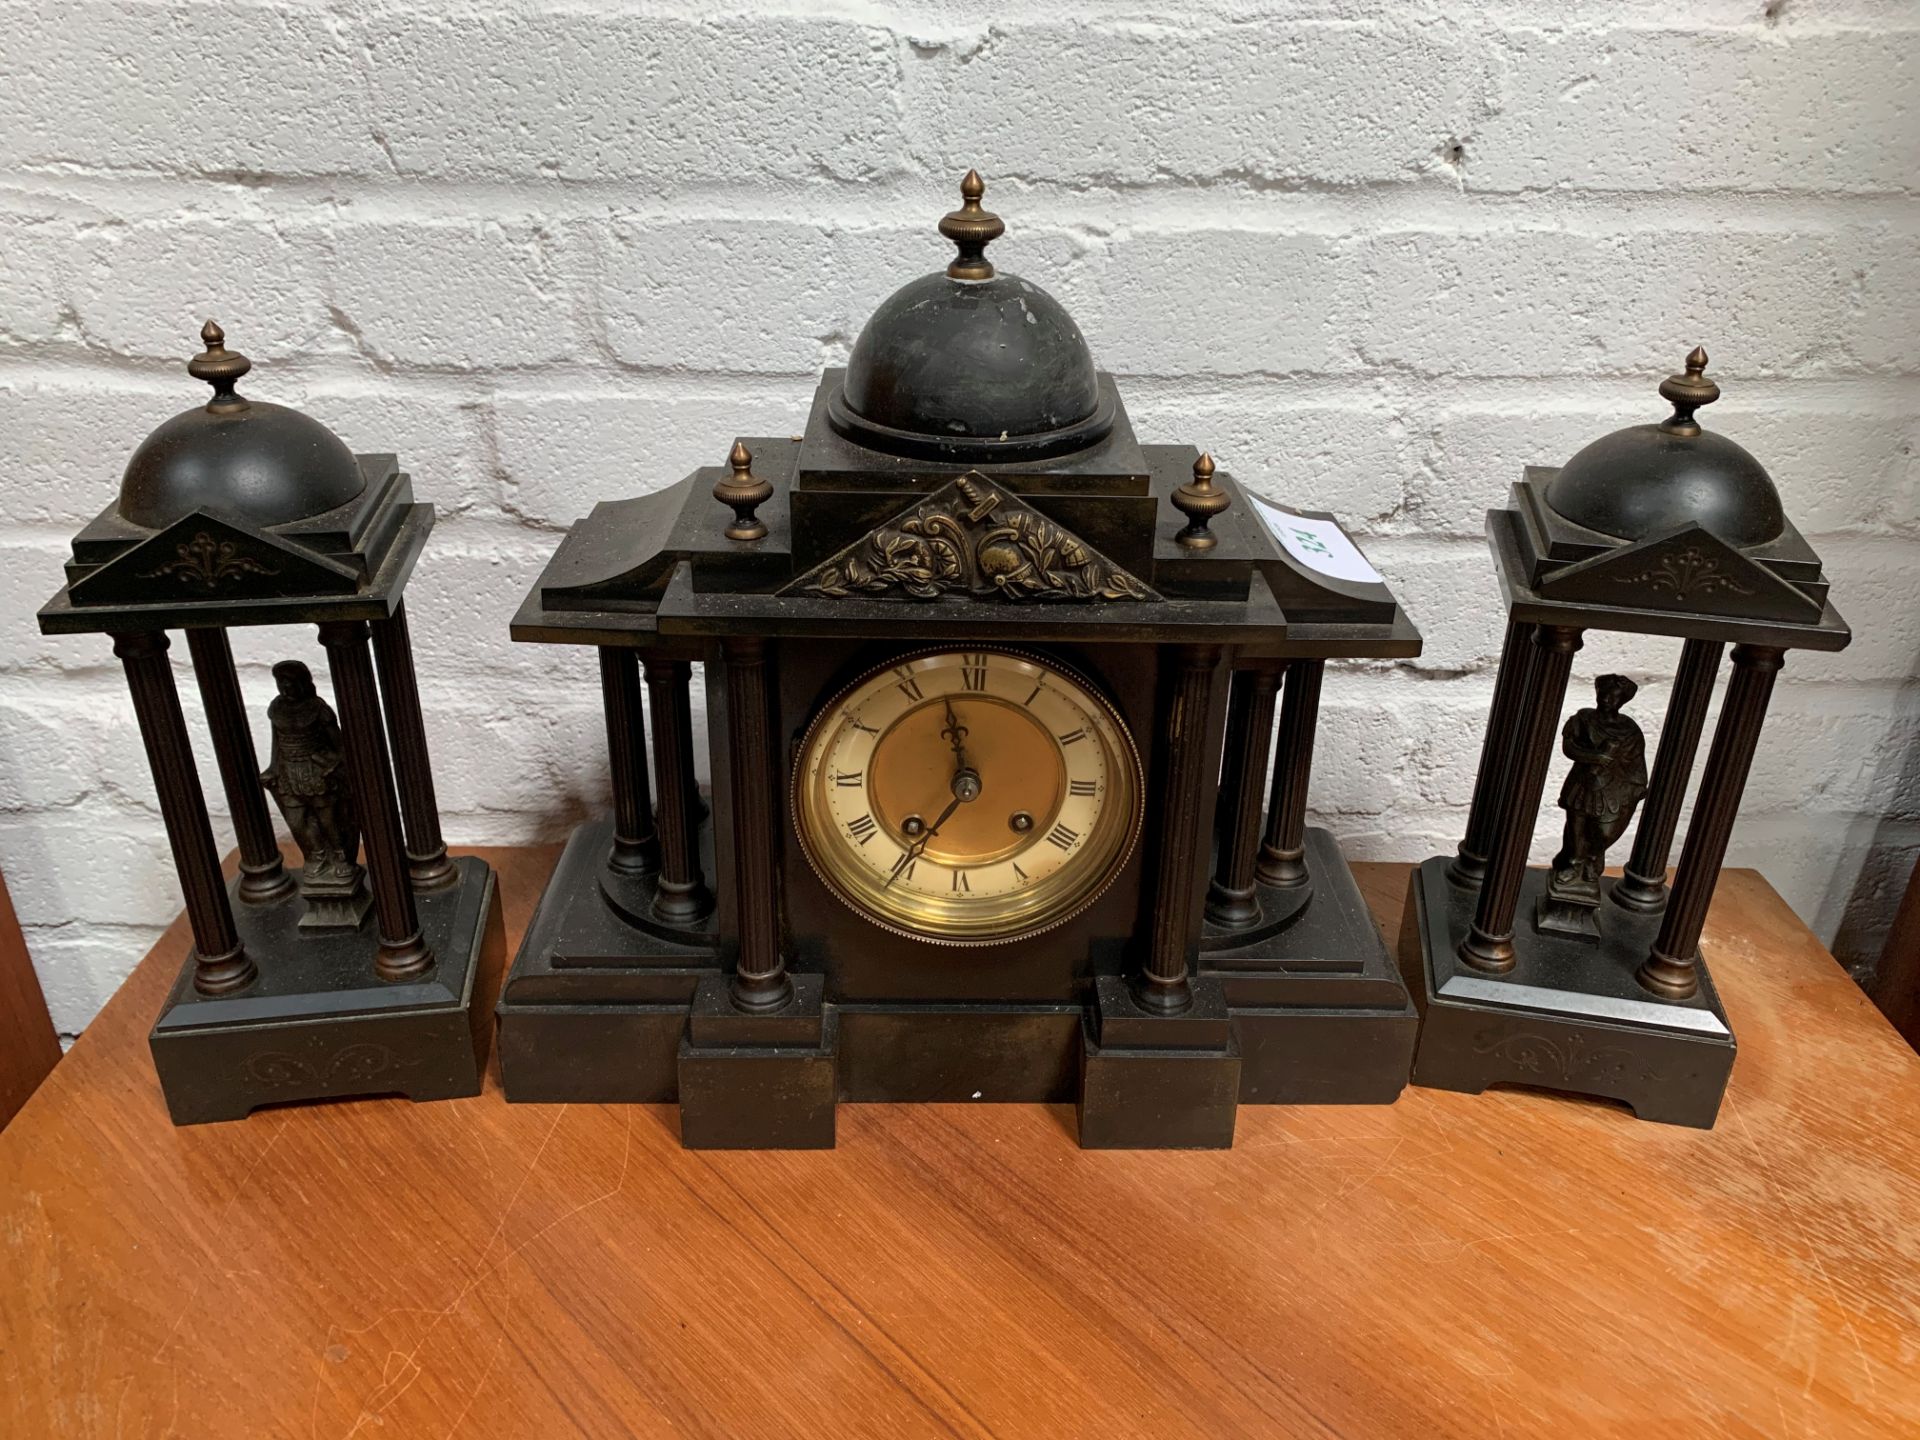 Slate clock set with two figurines garnitures.